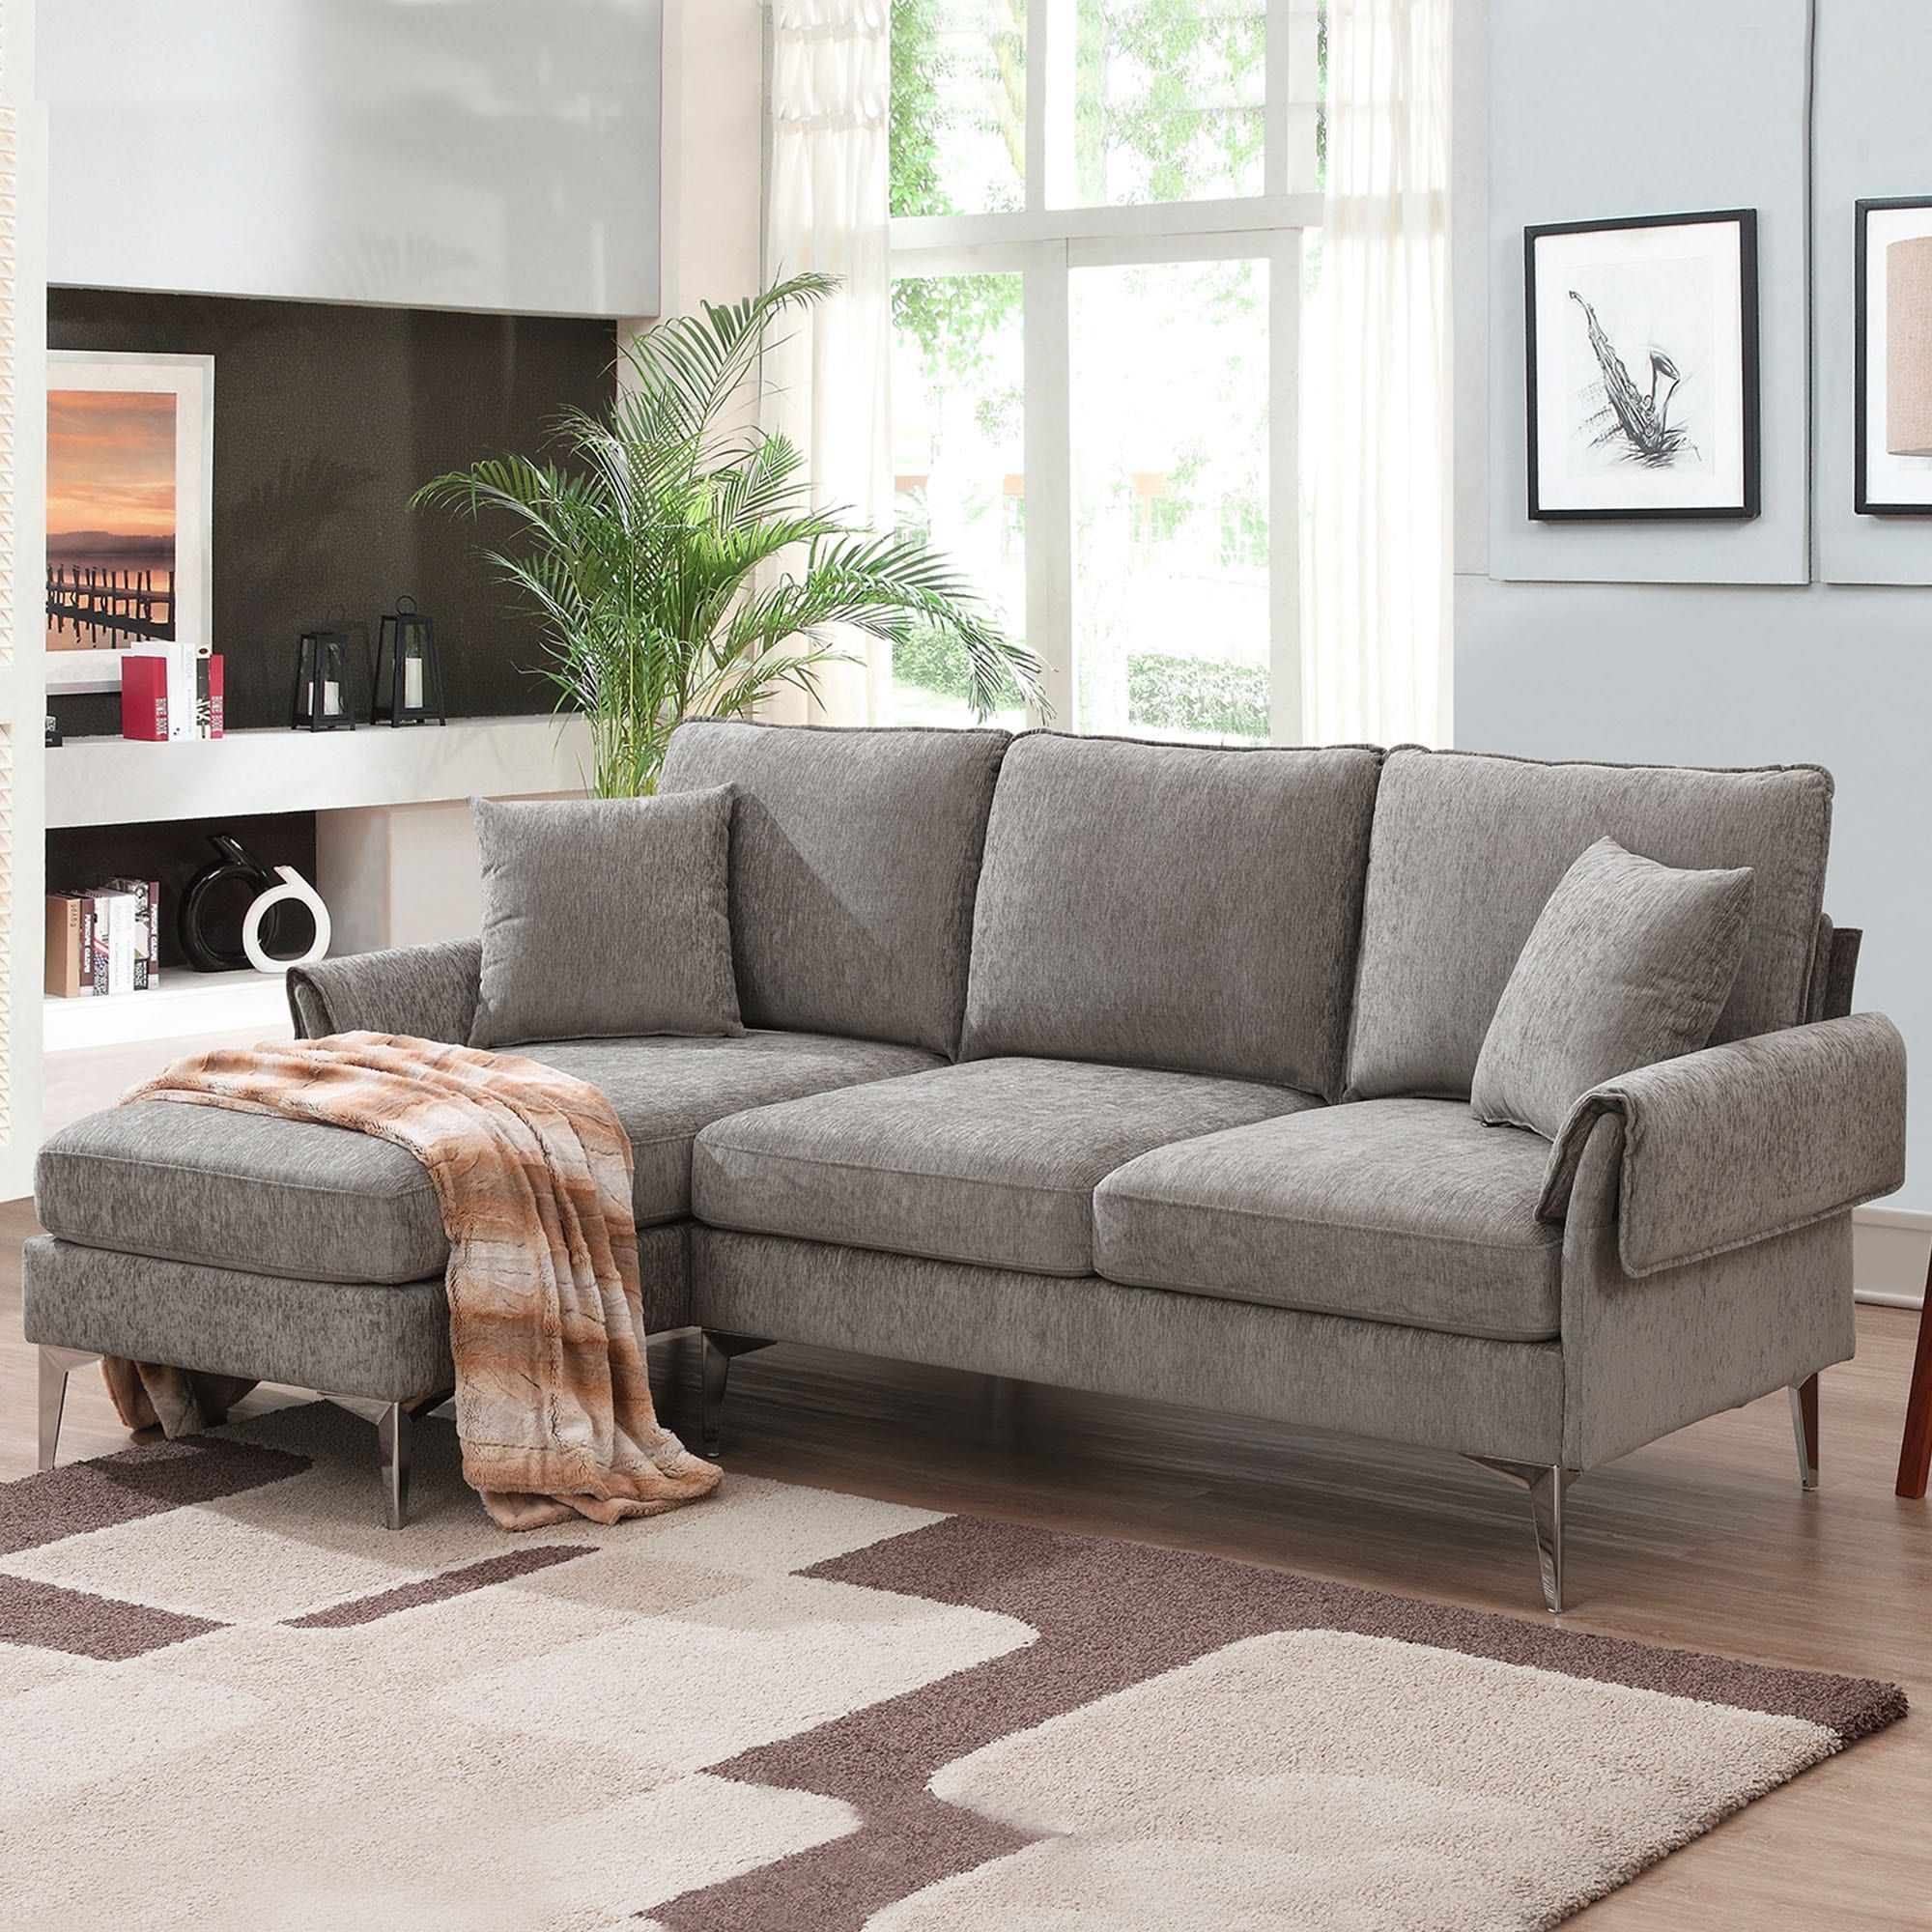 Modern Convertible Sectional Sofa, L Shaped Couch W/reversible Chaise And 2  Pillows – Bed Bath & Beyond – 37256829 Regarding L Shape Couches With Reversible Chaises (View 6 of 15)